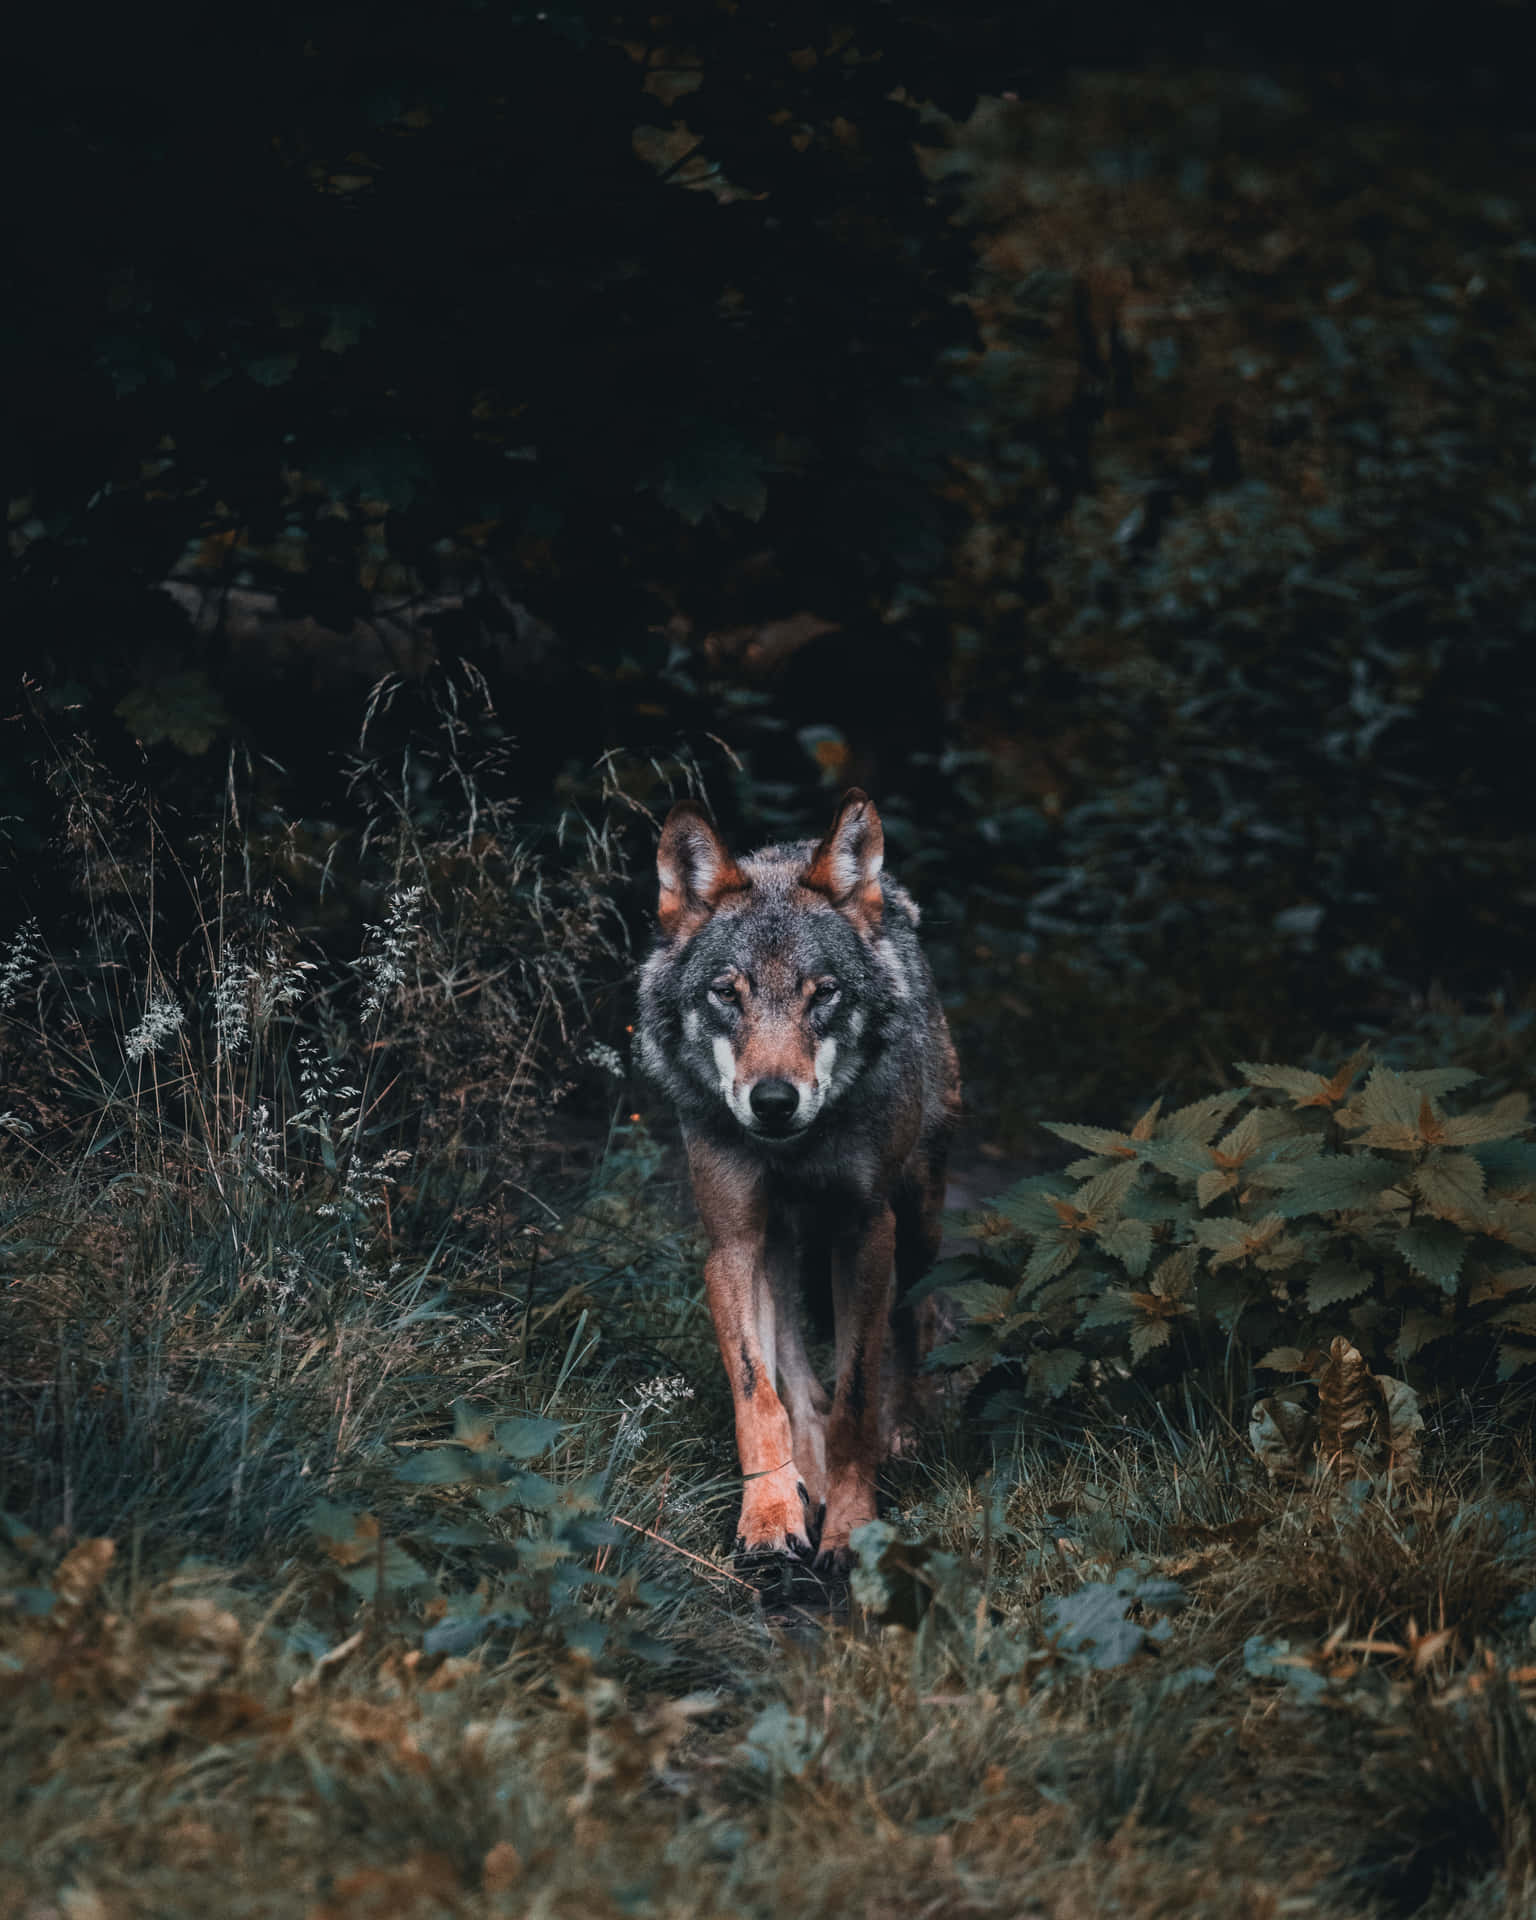 High Definition Coyote Image Wallpaper